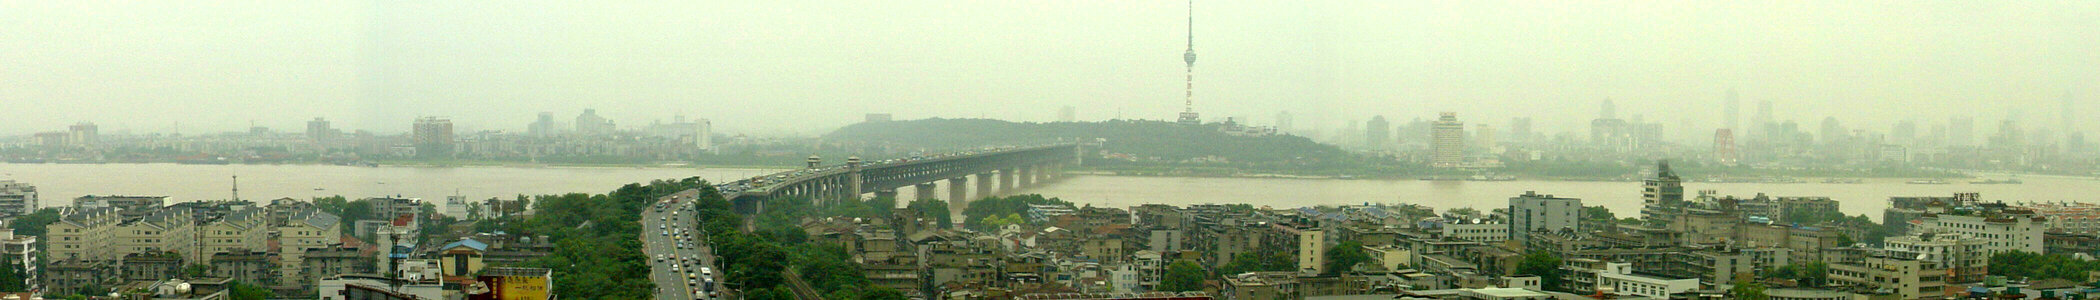 Wuhan Banner Bridge over the river Panoramic